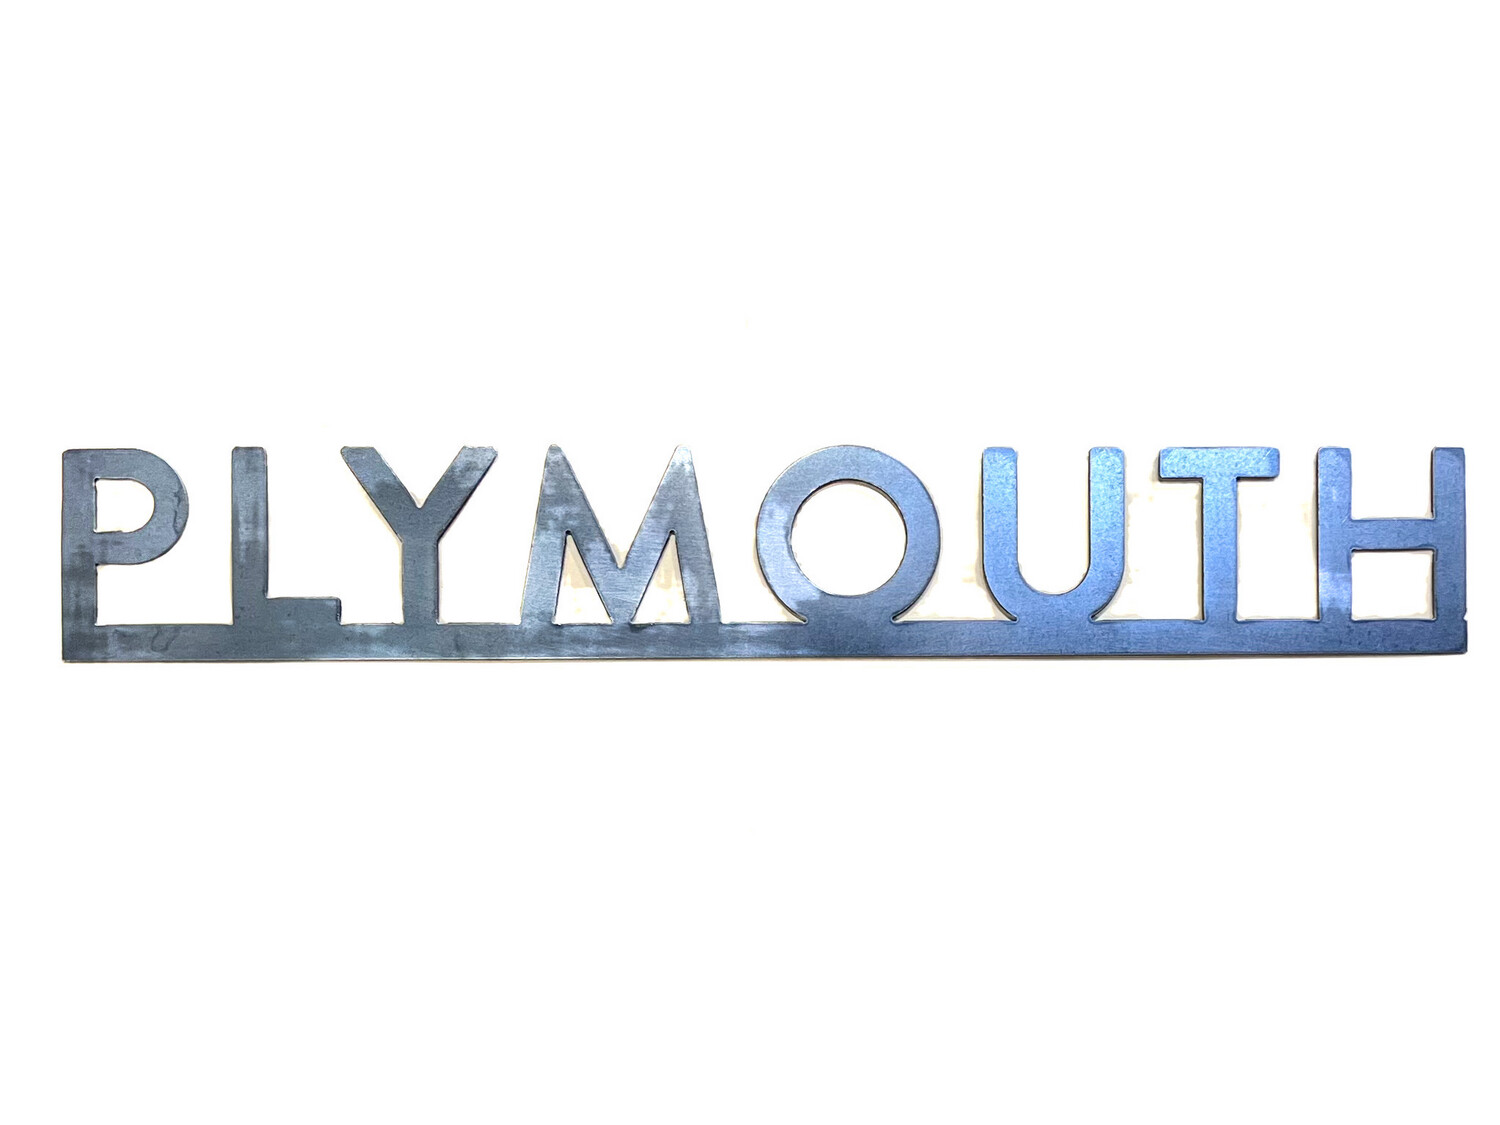 Plymouth Sign